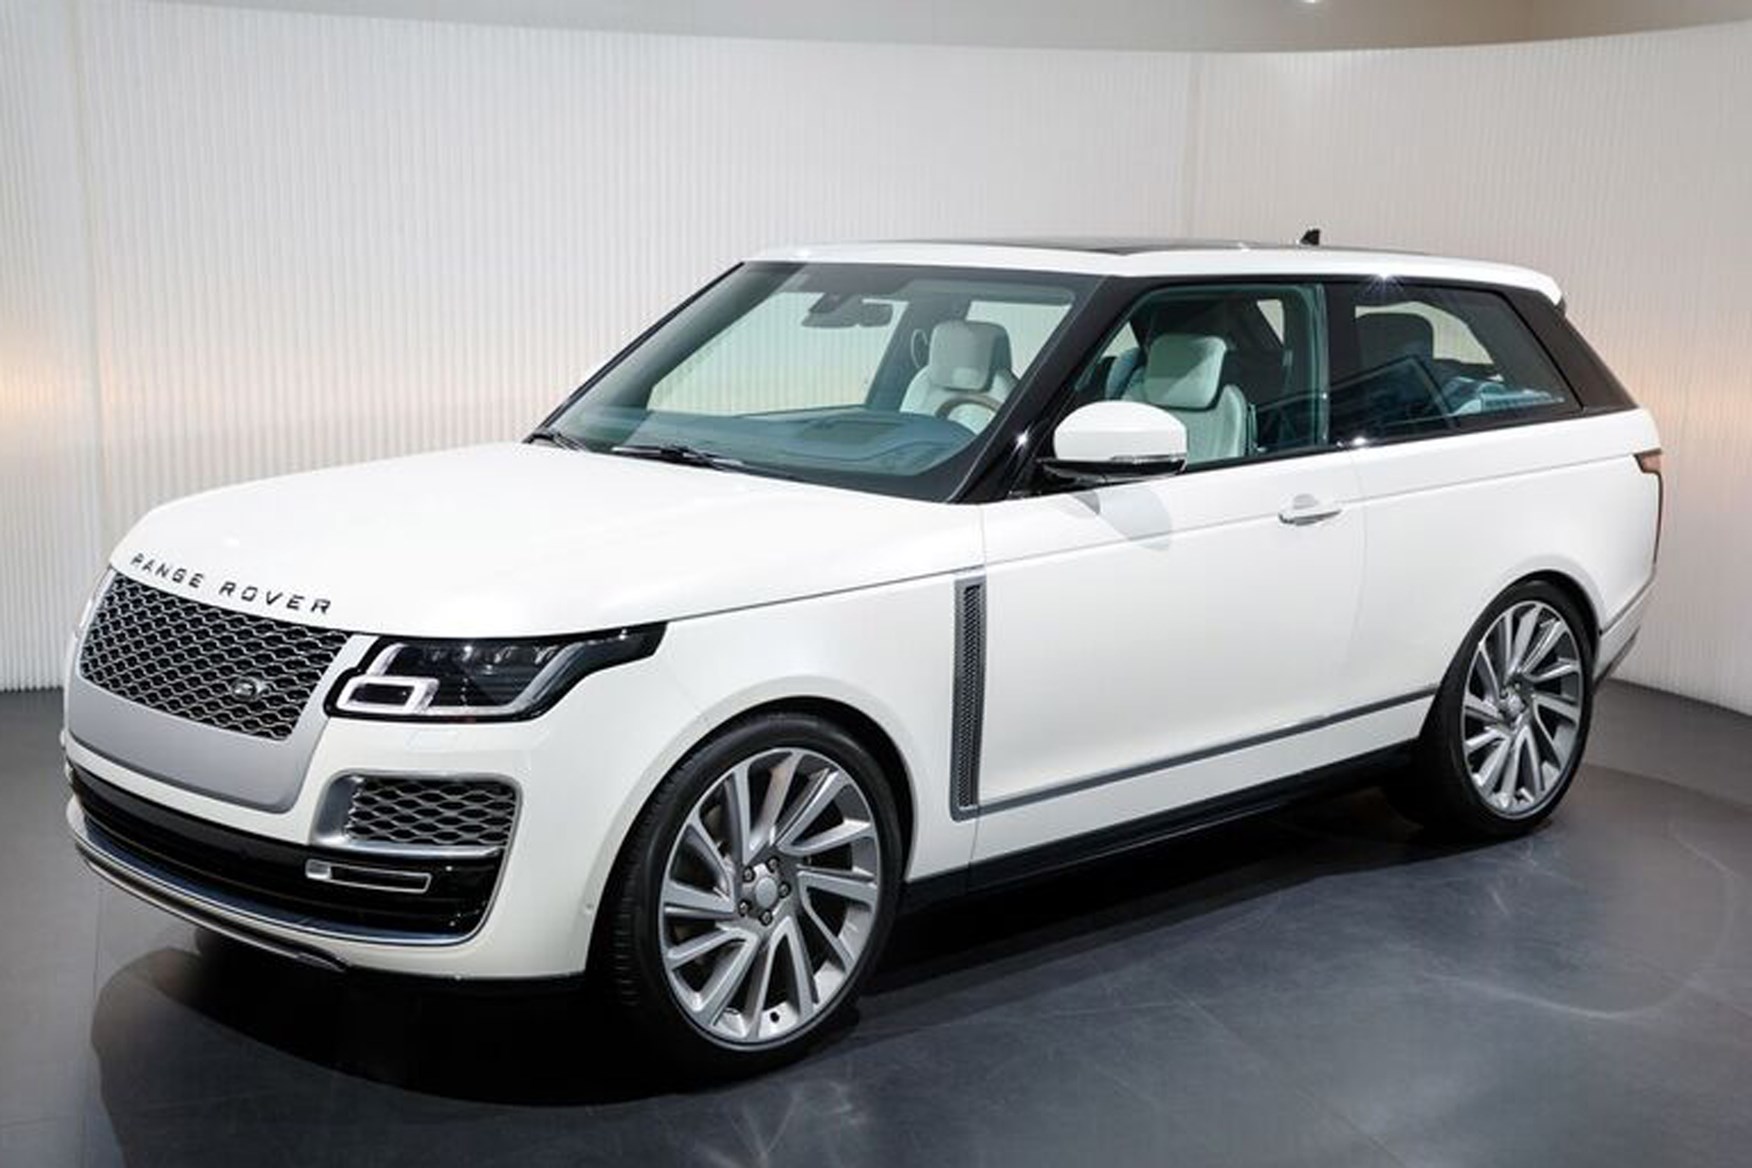 New Range Rover Sv Coupe News Pictures Specs Prices Car Magazine